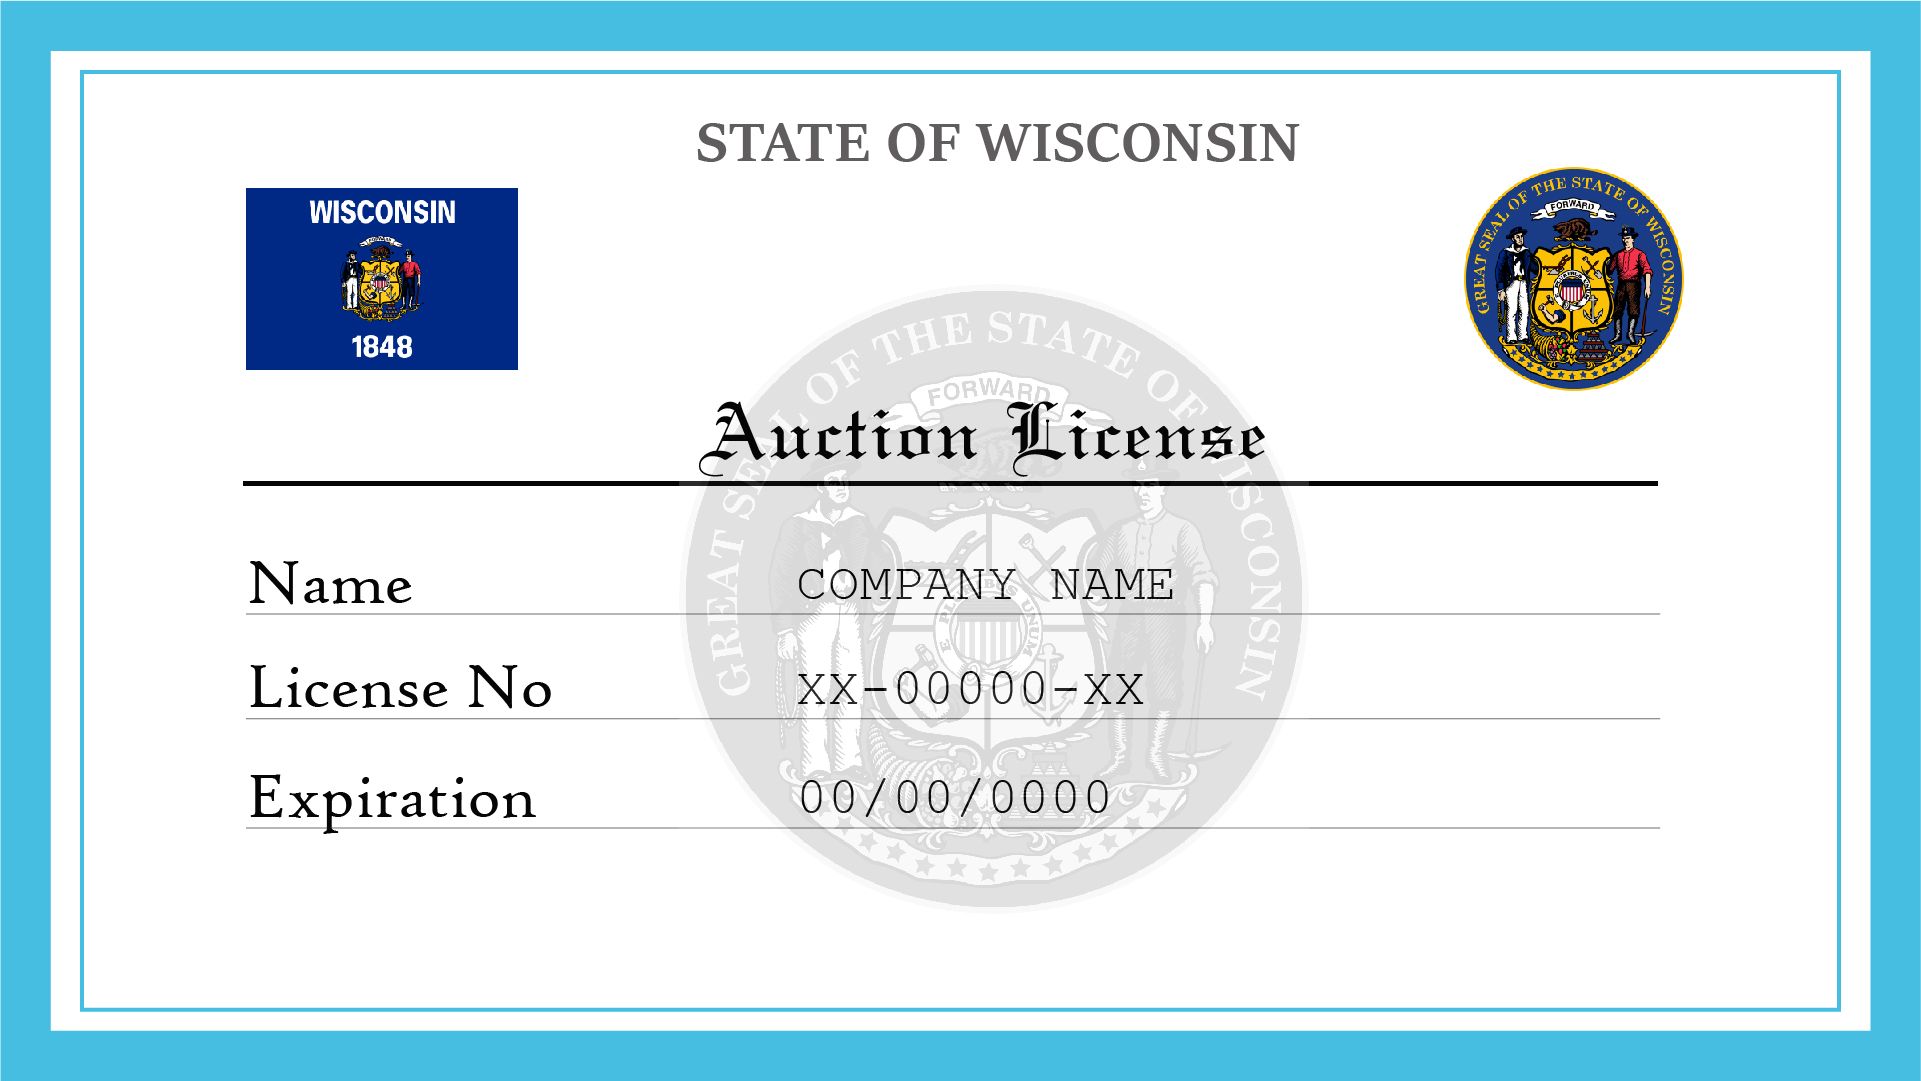 Wisconsin Auction License License Lookup